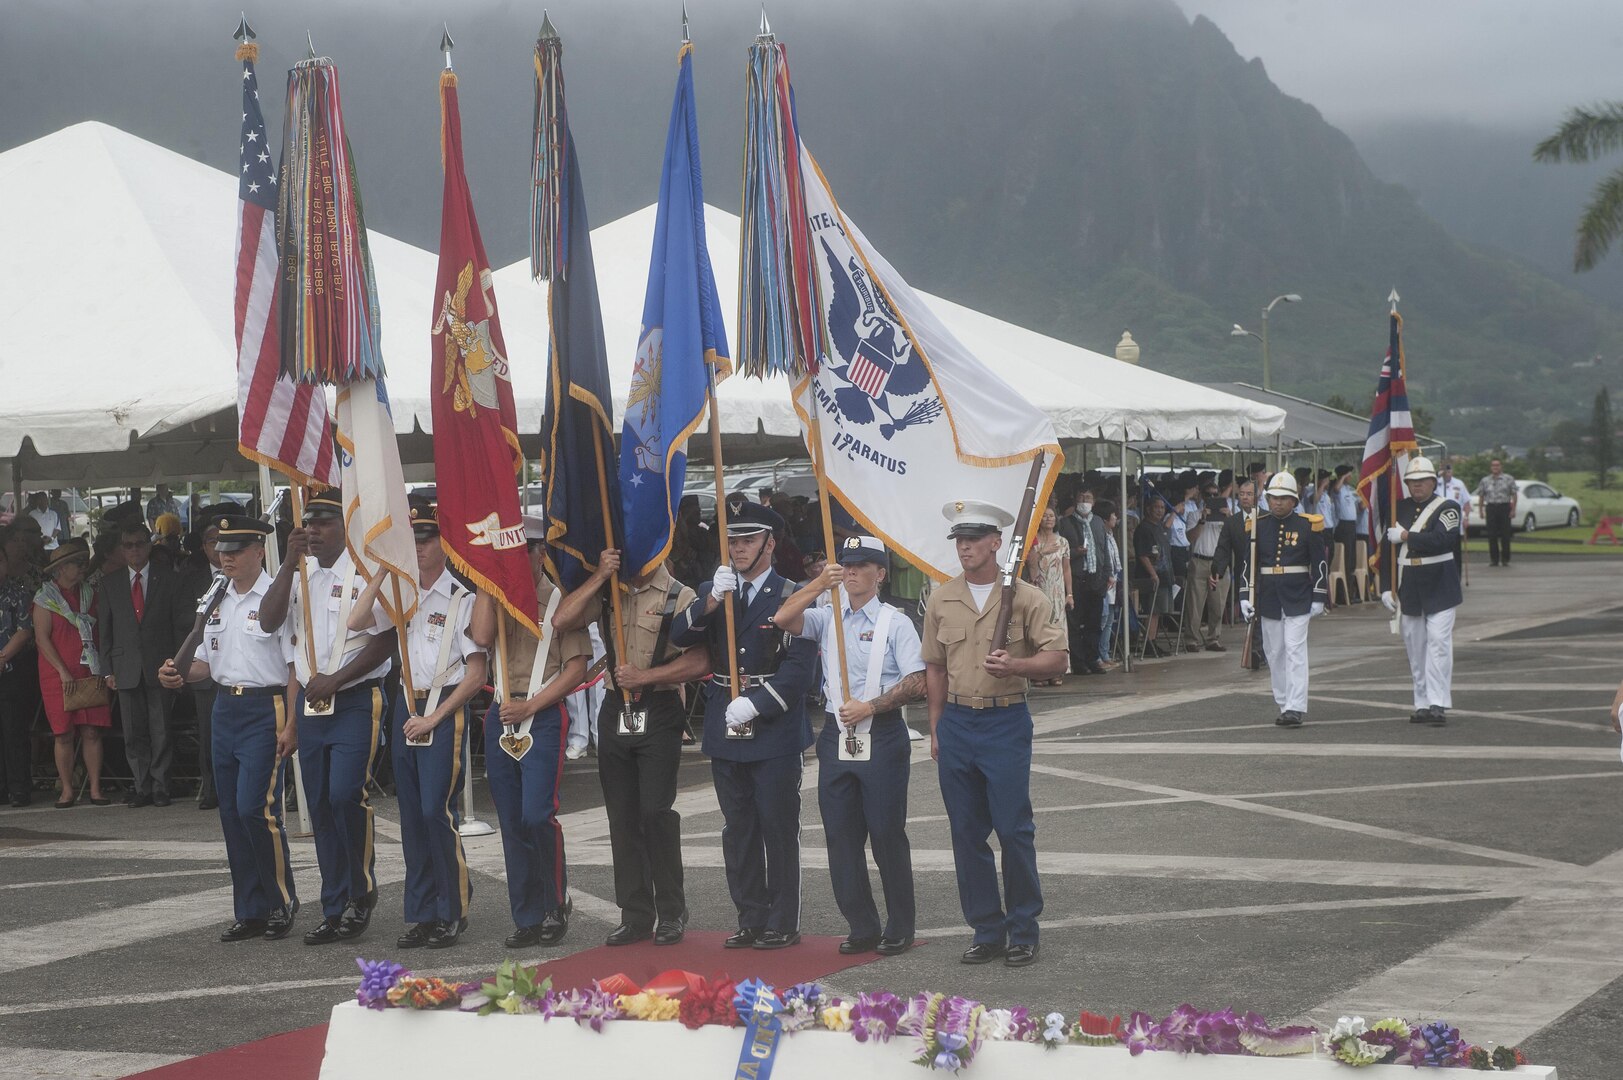 Members of the Joint Service Color Guard and Ceremonial Royal Guard post the colors during the 2015 Governor’s Veterans Day Ceremony at the Hawaii State Veterans Cemetery Nov. 11, in Kaneohe, Hawaii. U.S. Army Maj. Gen. Arthur J. Logan, the adjutant general of the state of Hawaii, and Shan Tsutsui, lieutenant governor of Hawaii, provided welcoming remarks and a keynote speech during the ceremony. (U.S. Air Force photo by Staff Sgt. Christopher Hubenthal)